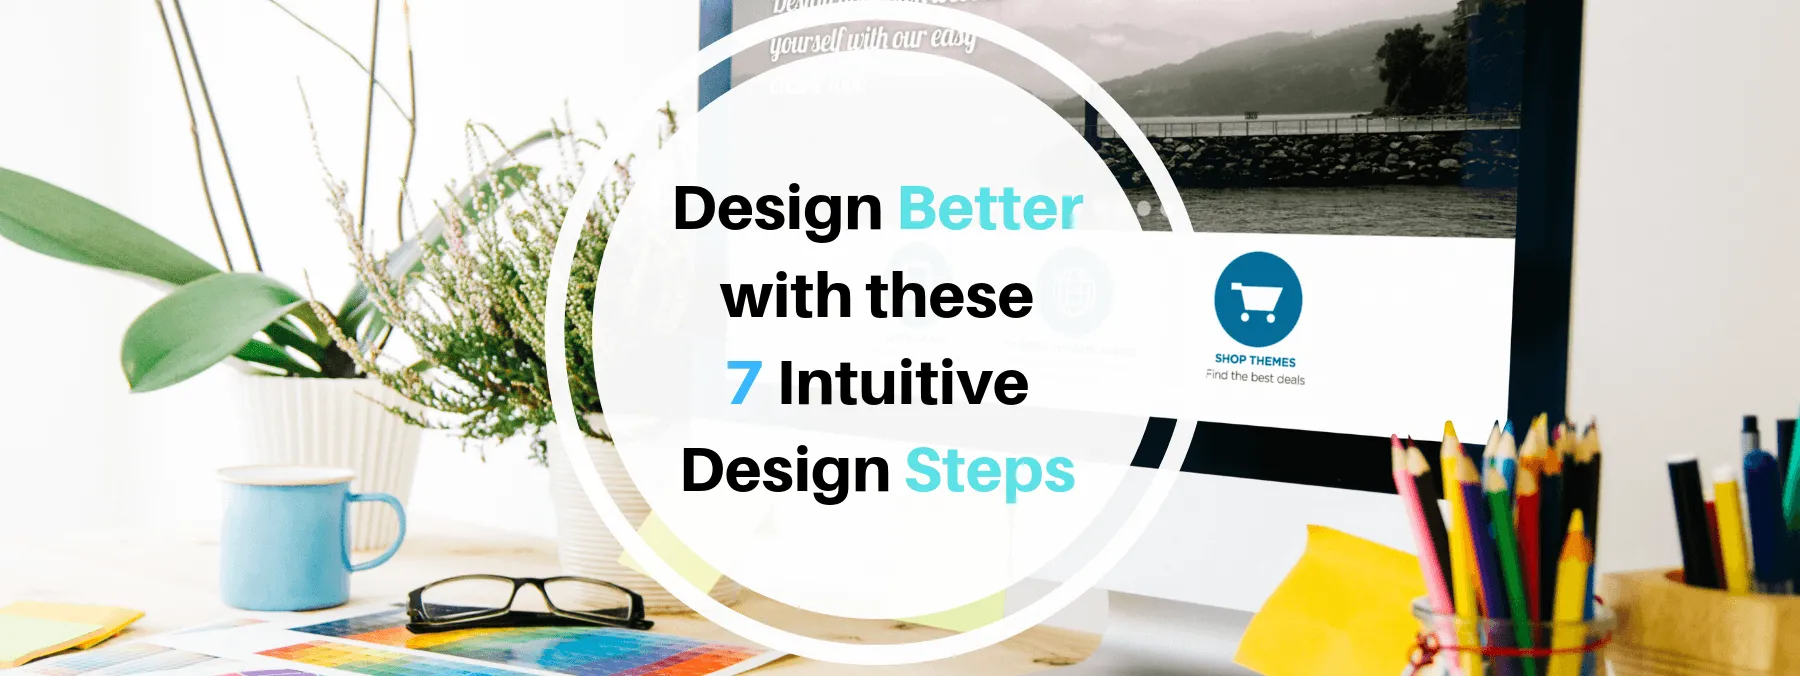 Design better with these 7 intuitive design steps